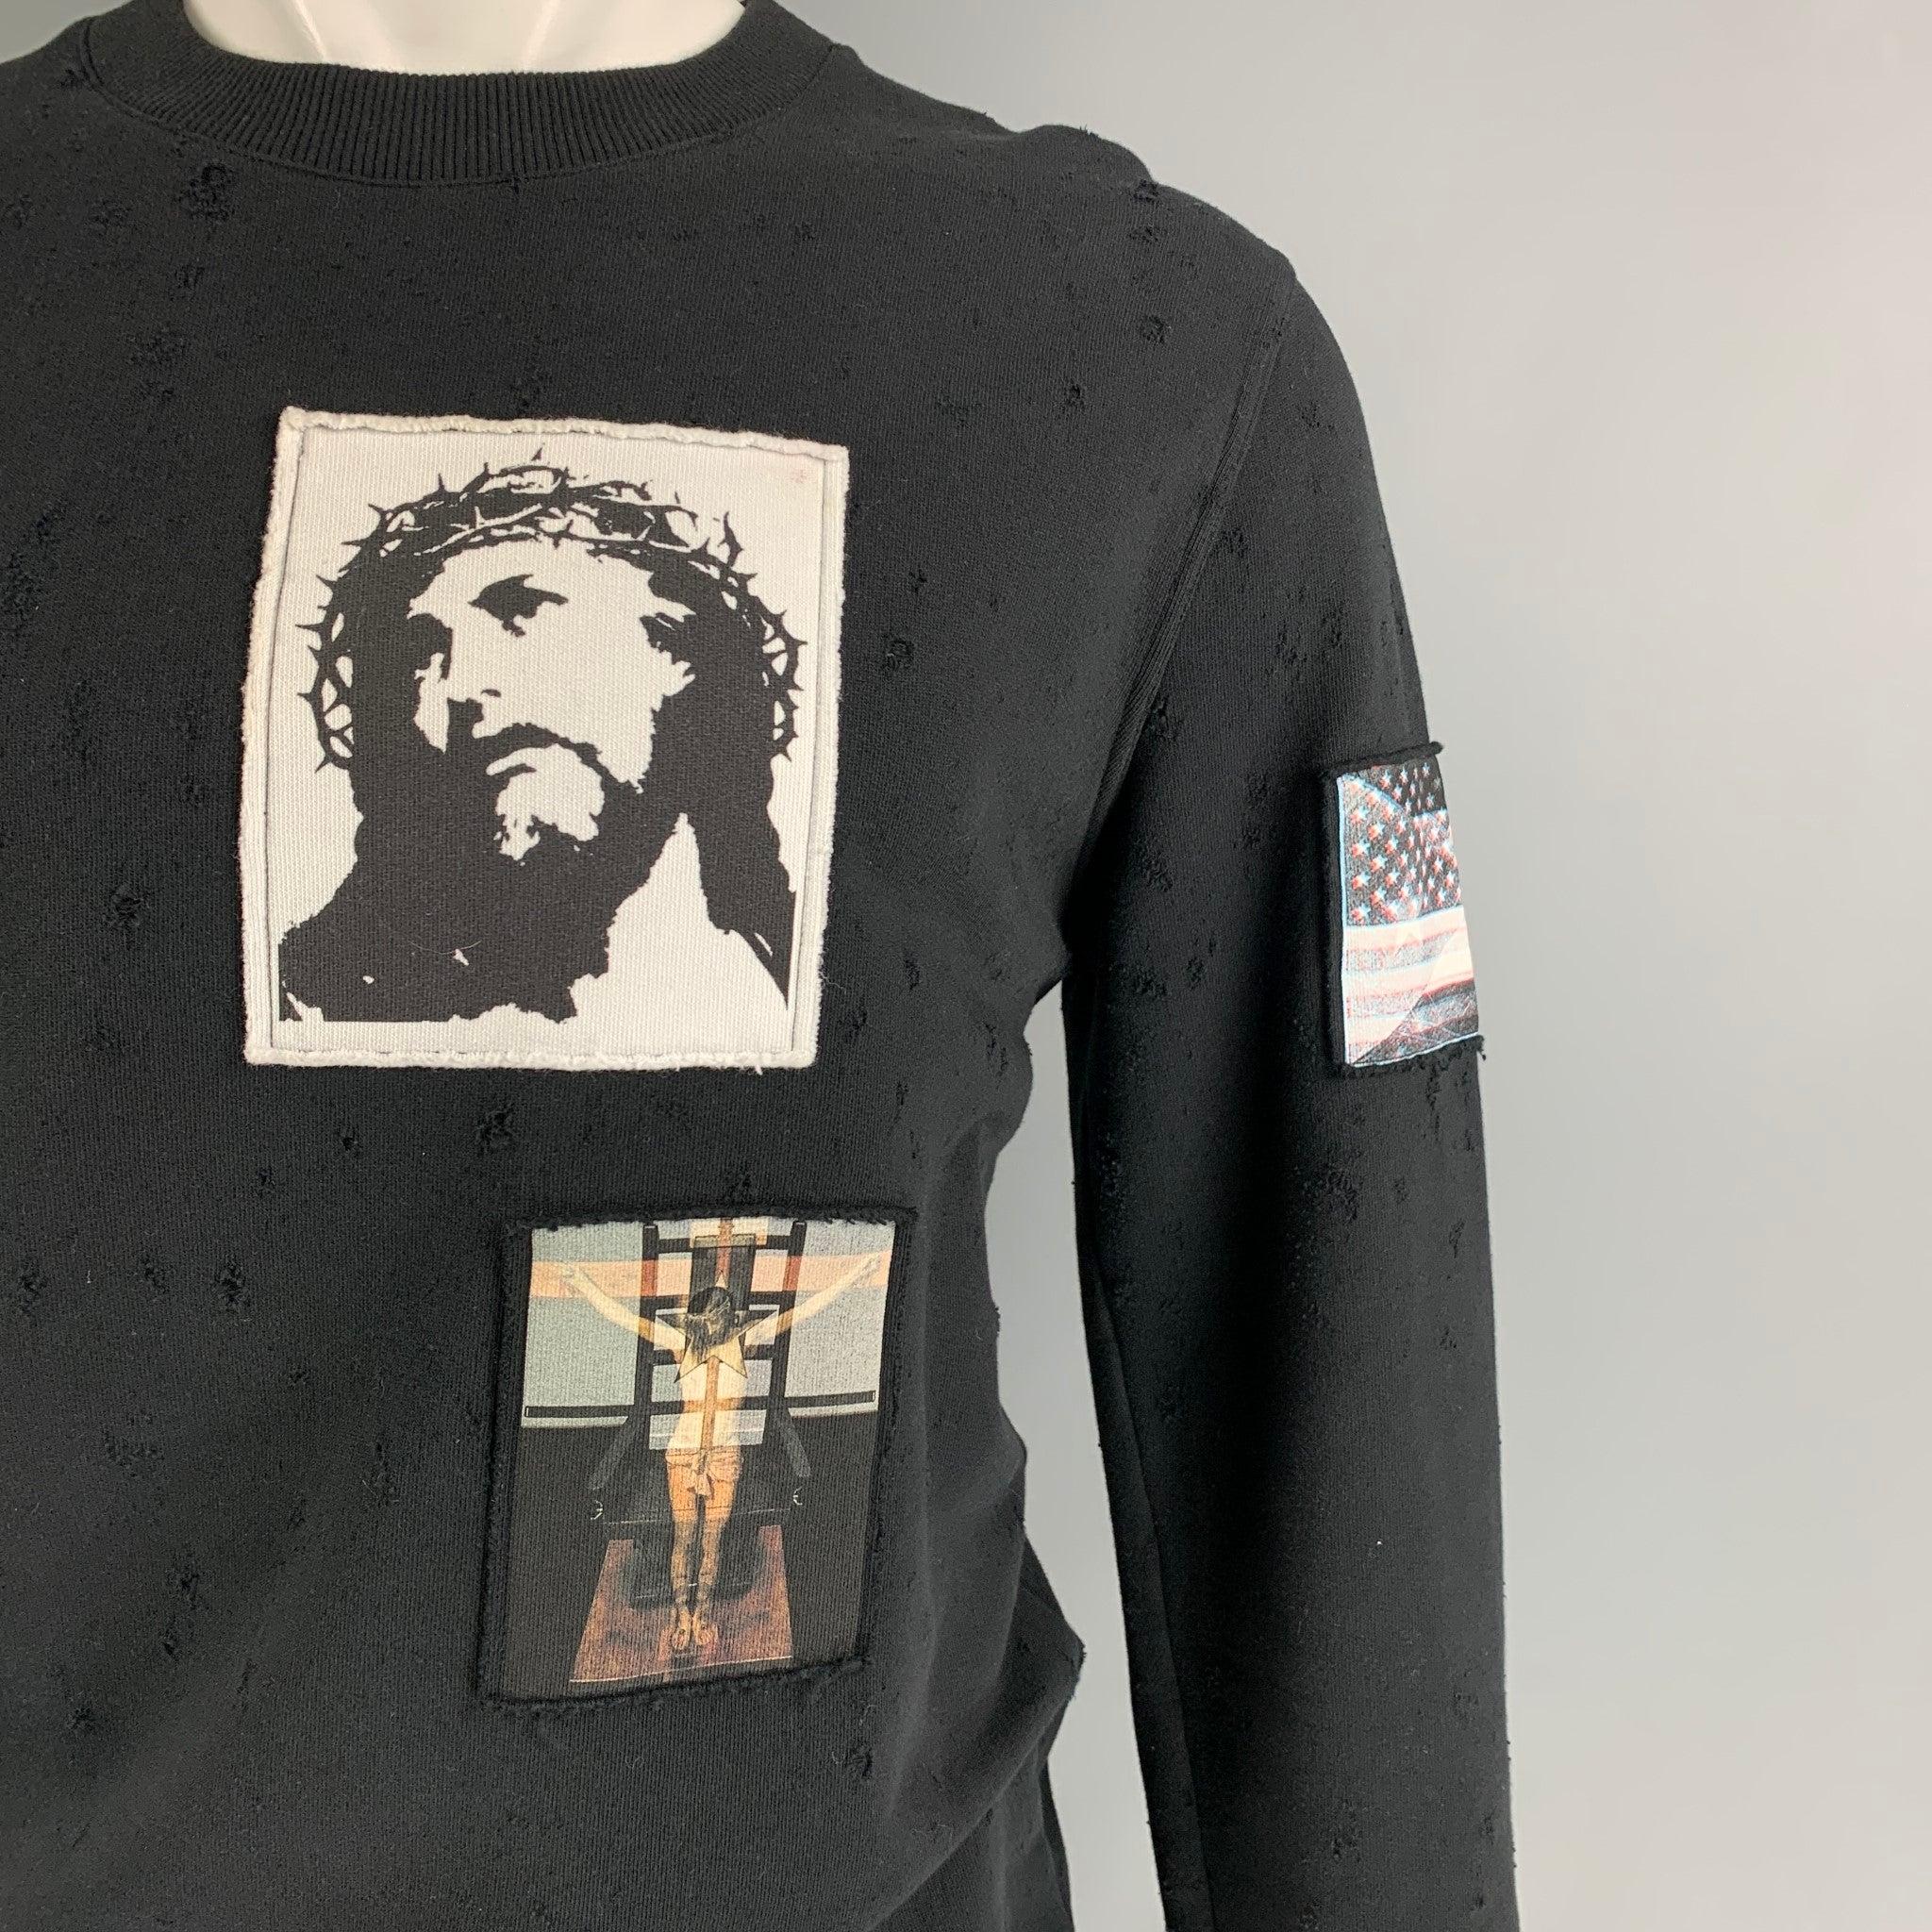 GIVENCHY by Ricardo Tisci sweatshirt short set comes in a black cotton with 'Jesus' patchwork designs featuring distressed details, crew-neck, and matching jesus graphic shorts. Made in Portugal.
Very Good
Pre-Owned Condition. 

Marked:   S / 34